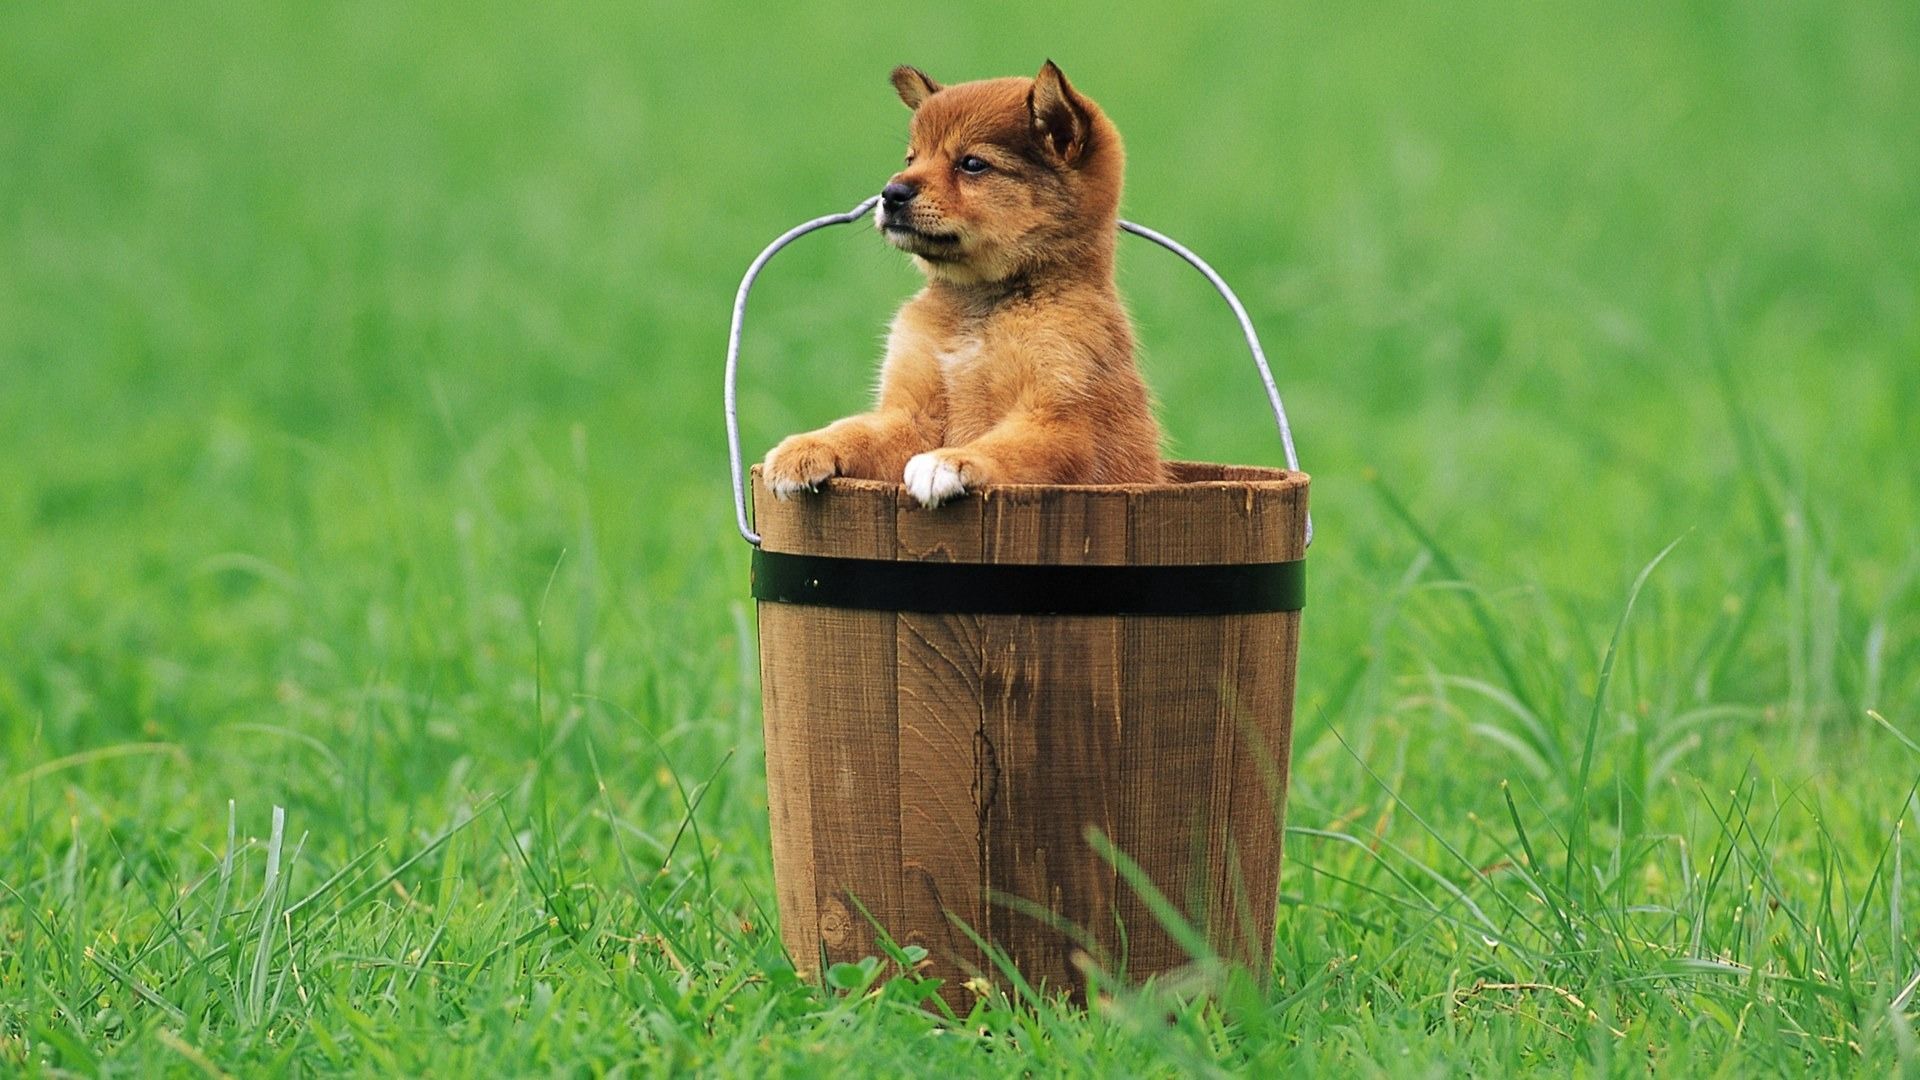 animals, grass, sit, puppy, expectation, waiting, bucket High Definition image